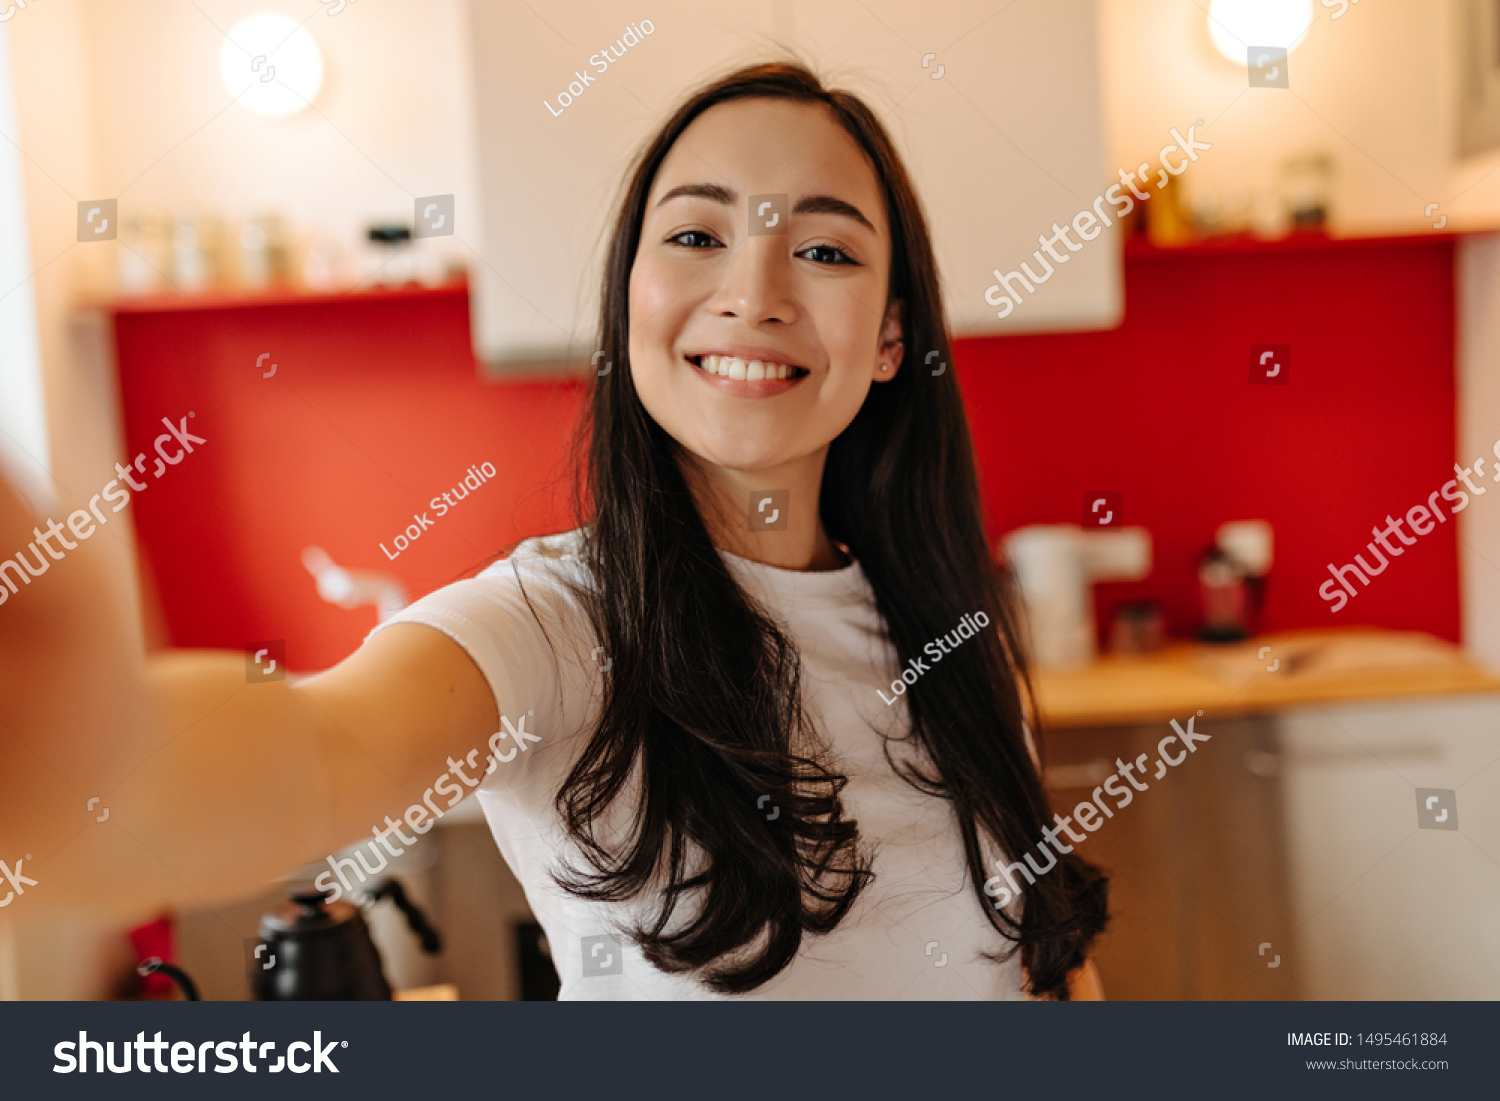 Woman in great mood takes selfie in kitchen. Portrait of brown-eyed girl #1495461884